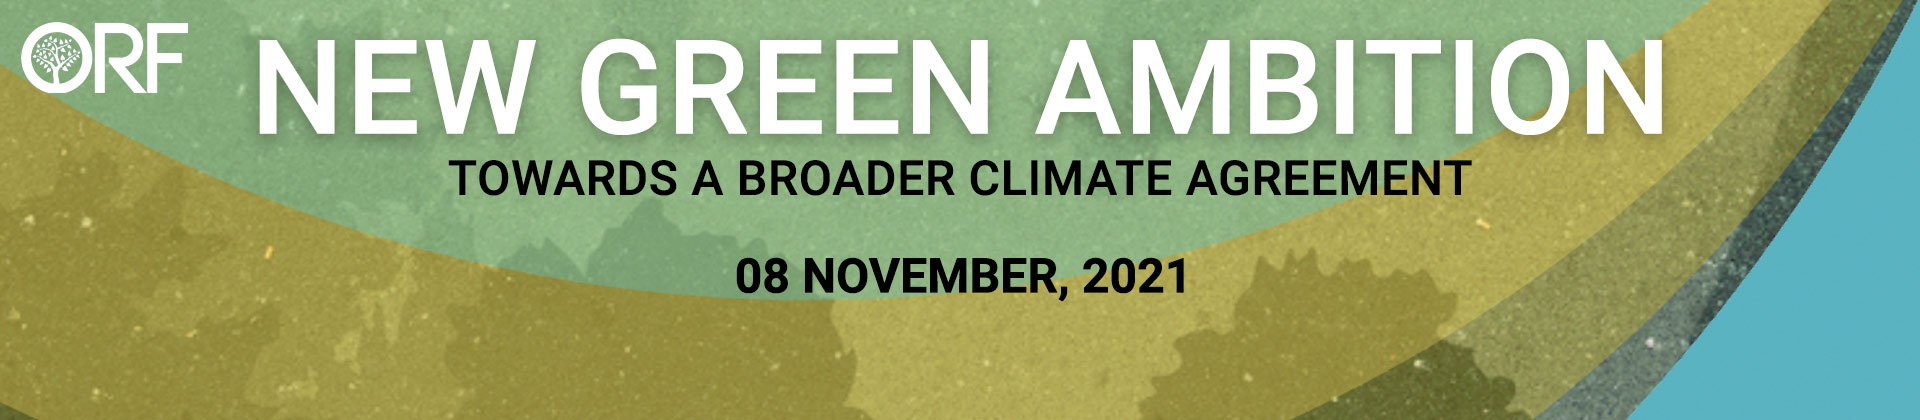 New Green Ambition: Towards a Broader Climate Agreement